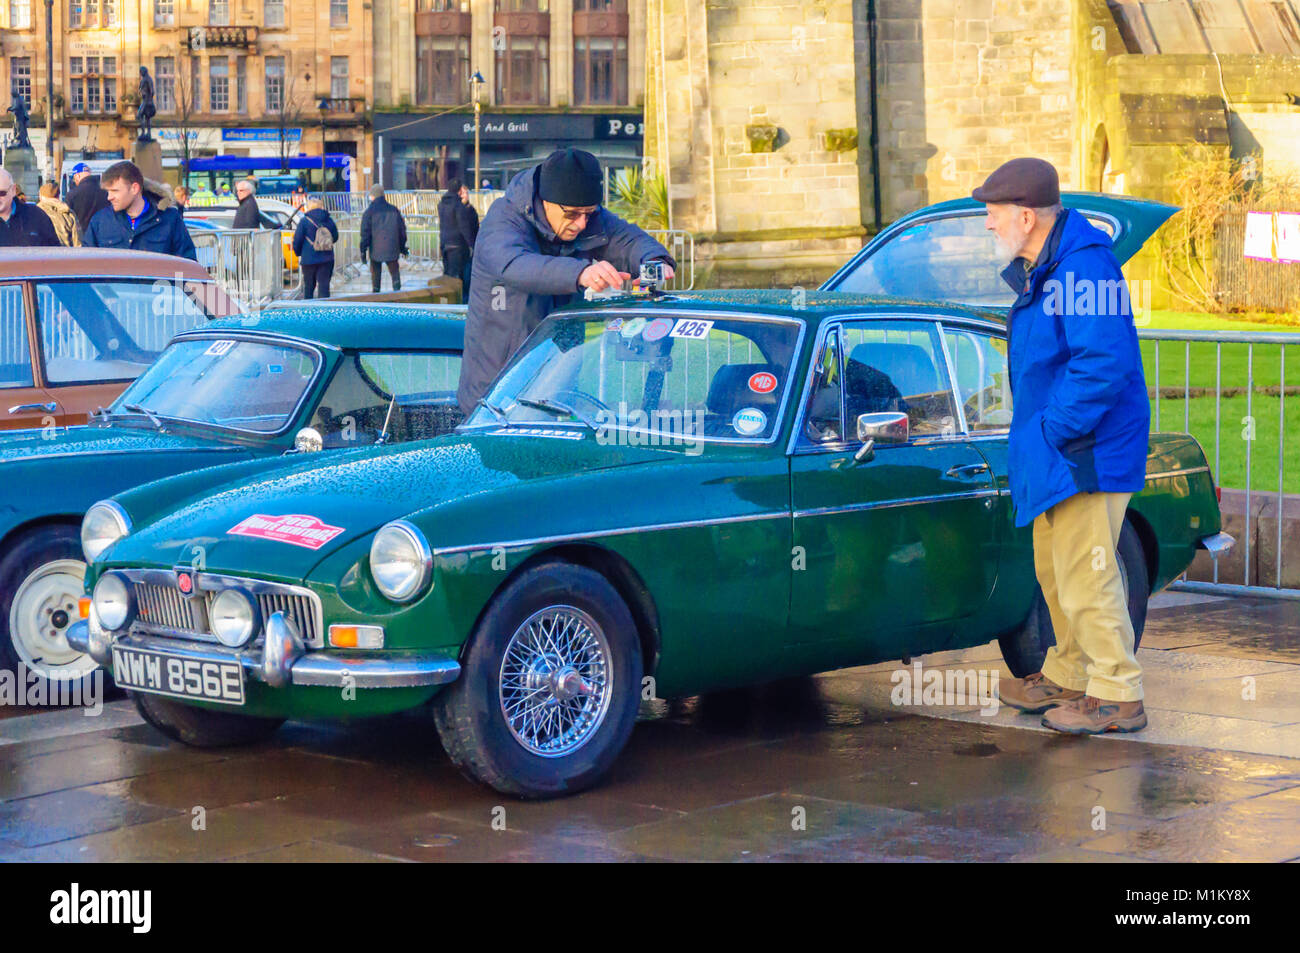 Paisley, Scotland, UK. 31st January 2018: A dark green MG. The Monte Carlo Rally starts at Paisley Abbey. This year sees the 21st  Historique event and the 3rd Classique event. Both events are staged by the Automobile Club de Monaco  and take place on open public roads. The distance to Monte Carlo is 1270 miles. Credit: Skully/Alamy Live News Stock Photo